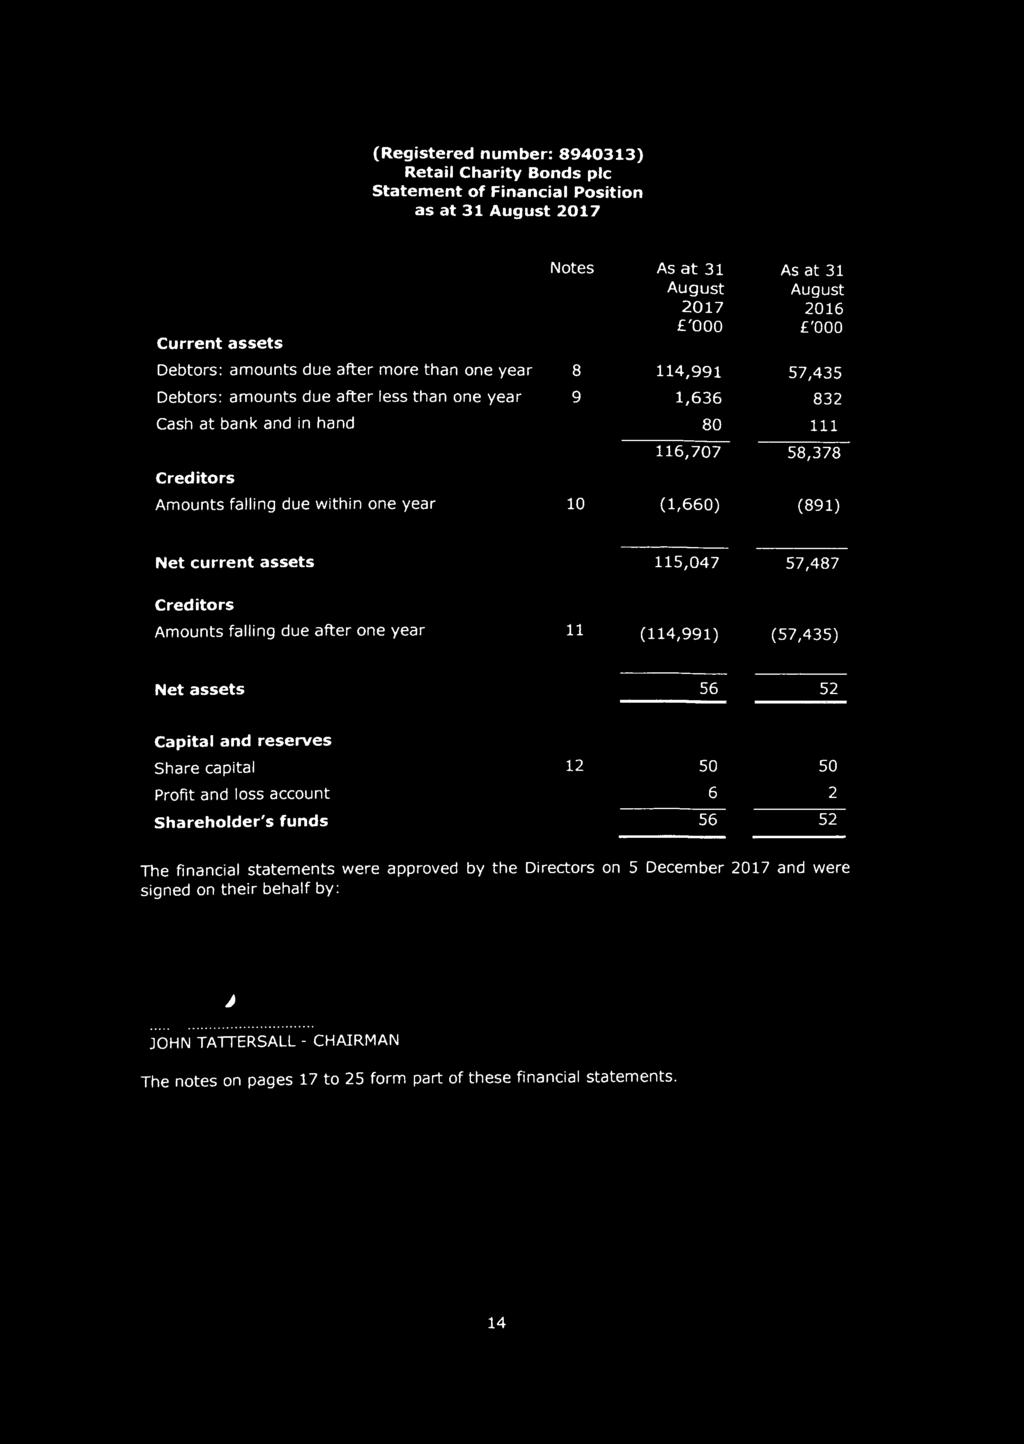 (1,660) (891) Net current assets Creditors Amounts falling due after one year 11 115,047 57,487 (114,991) (57,435) Net assets 56 52 Capital and reserves Share capital Profit and loss account